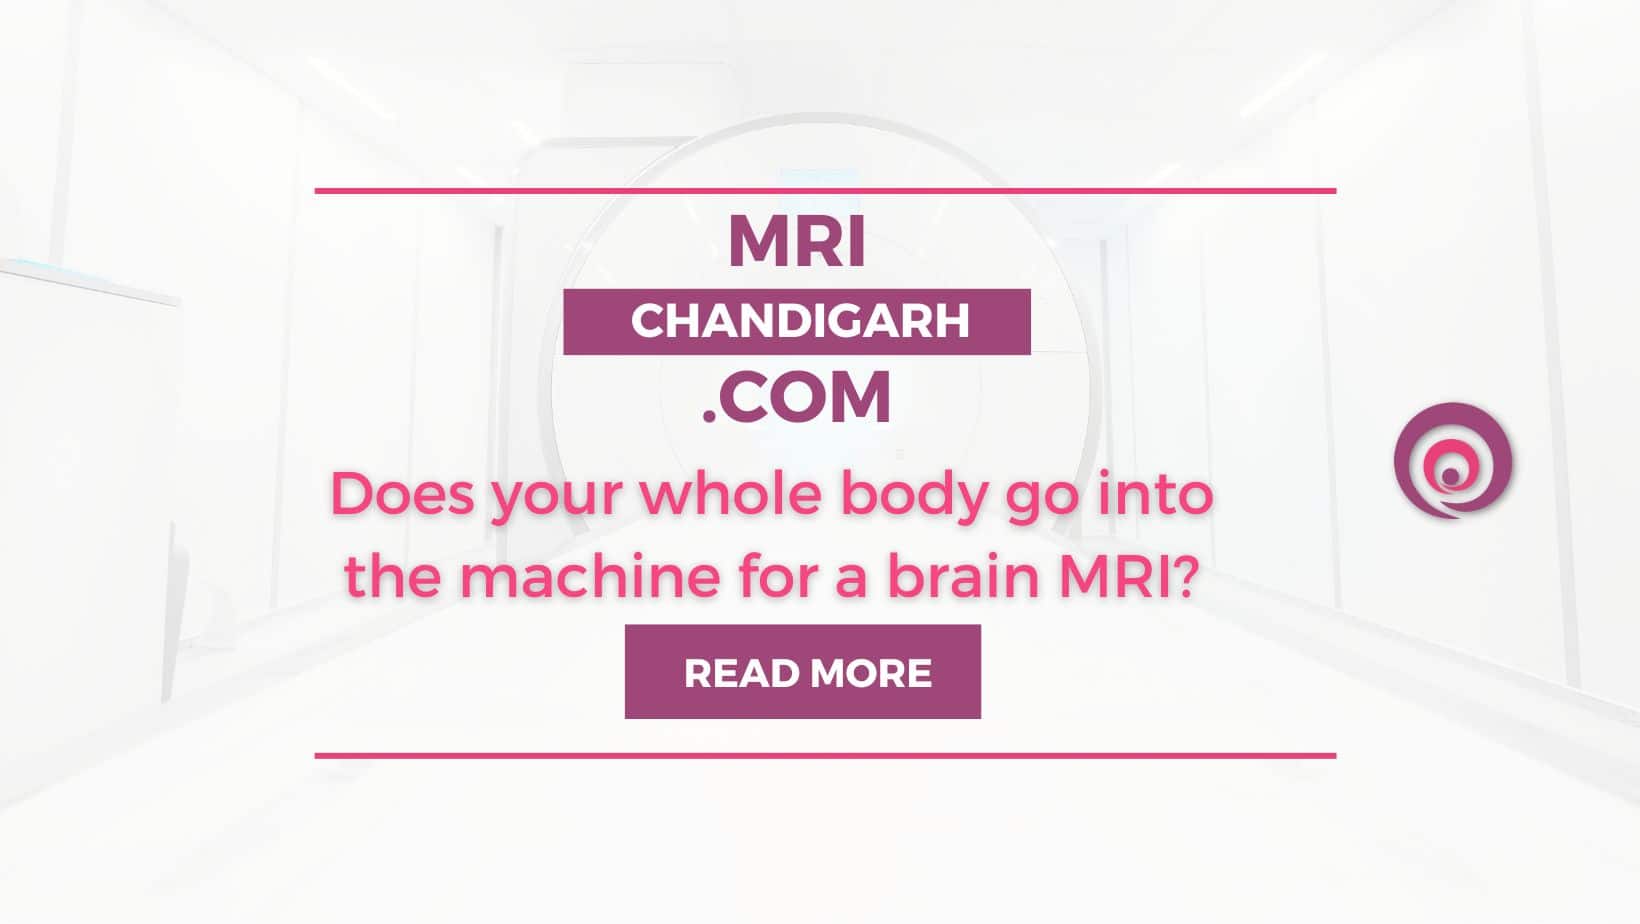 Does your whole body go into the machine for a brain MRI?